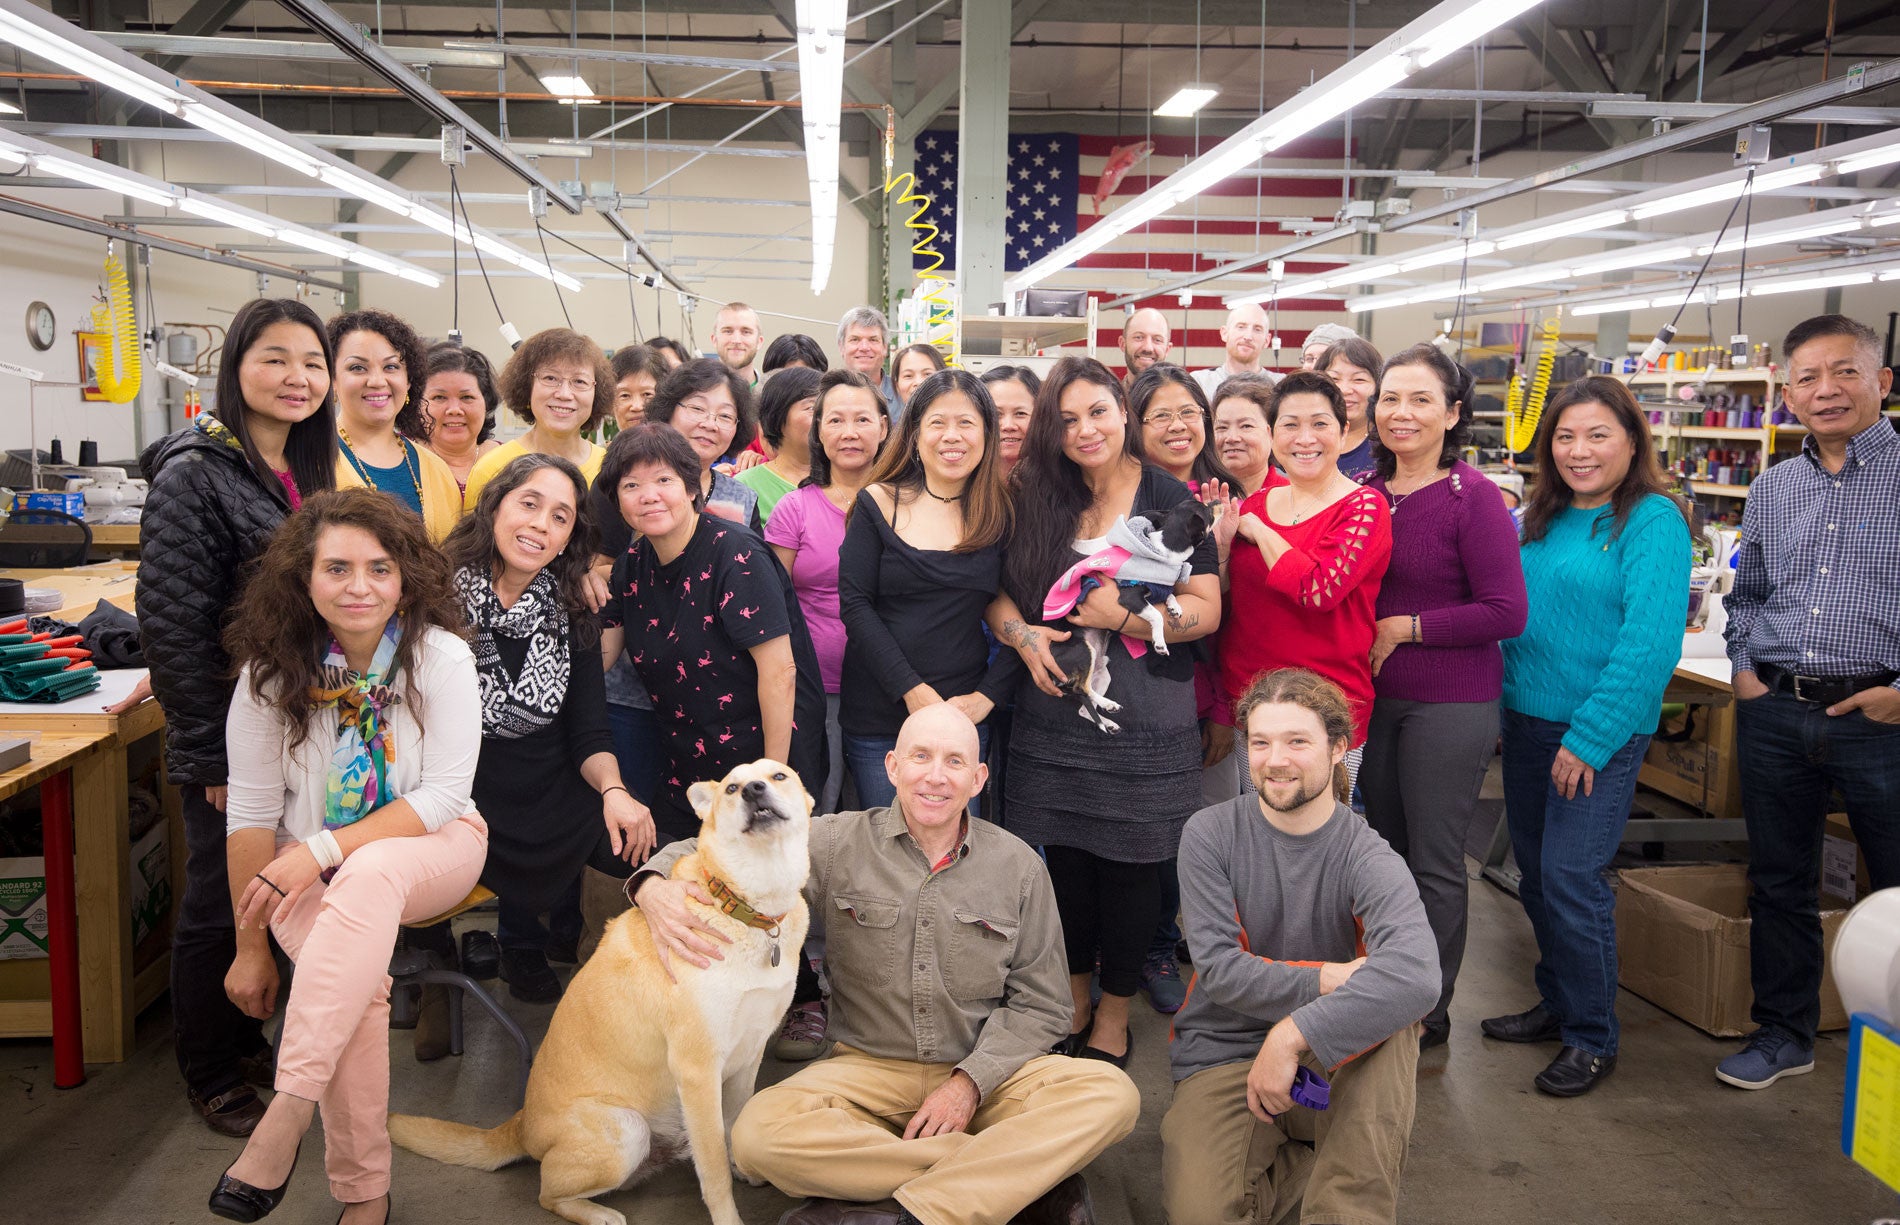 Group photo of the TOM BIHN crew in our Seattle factory